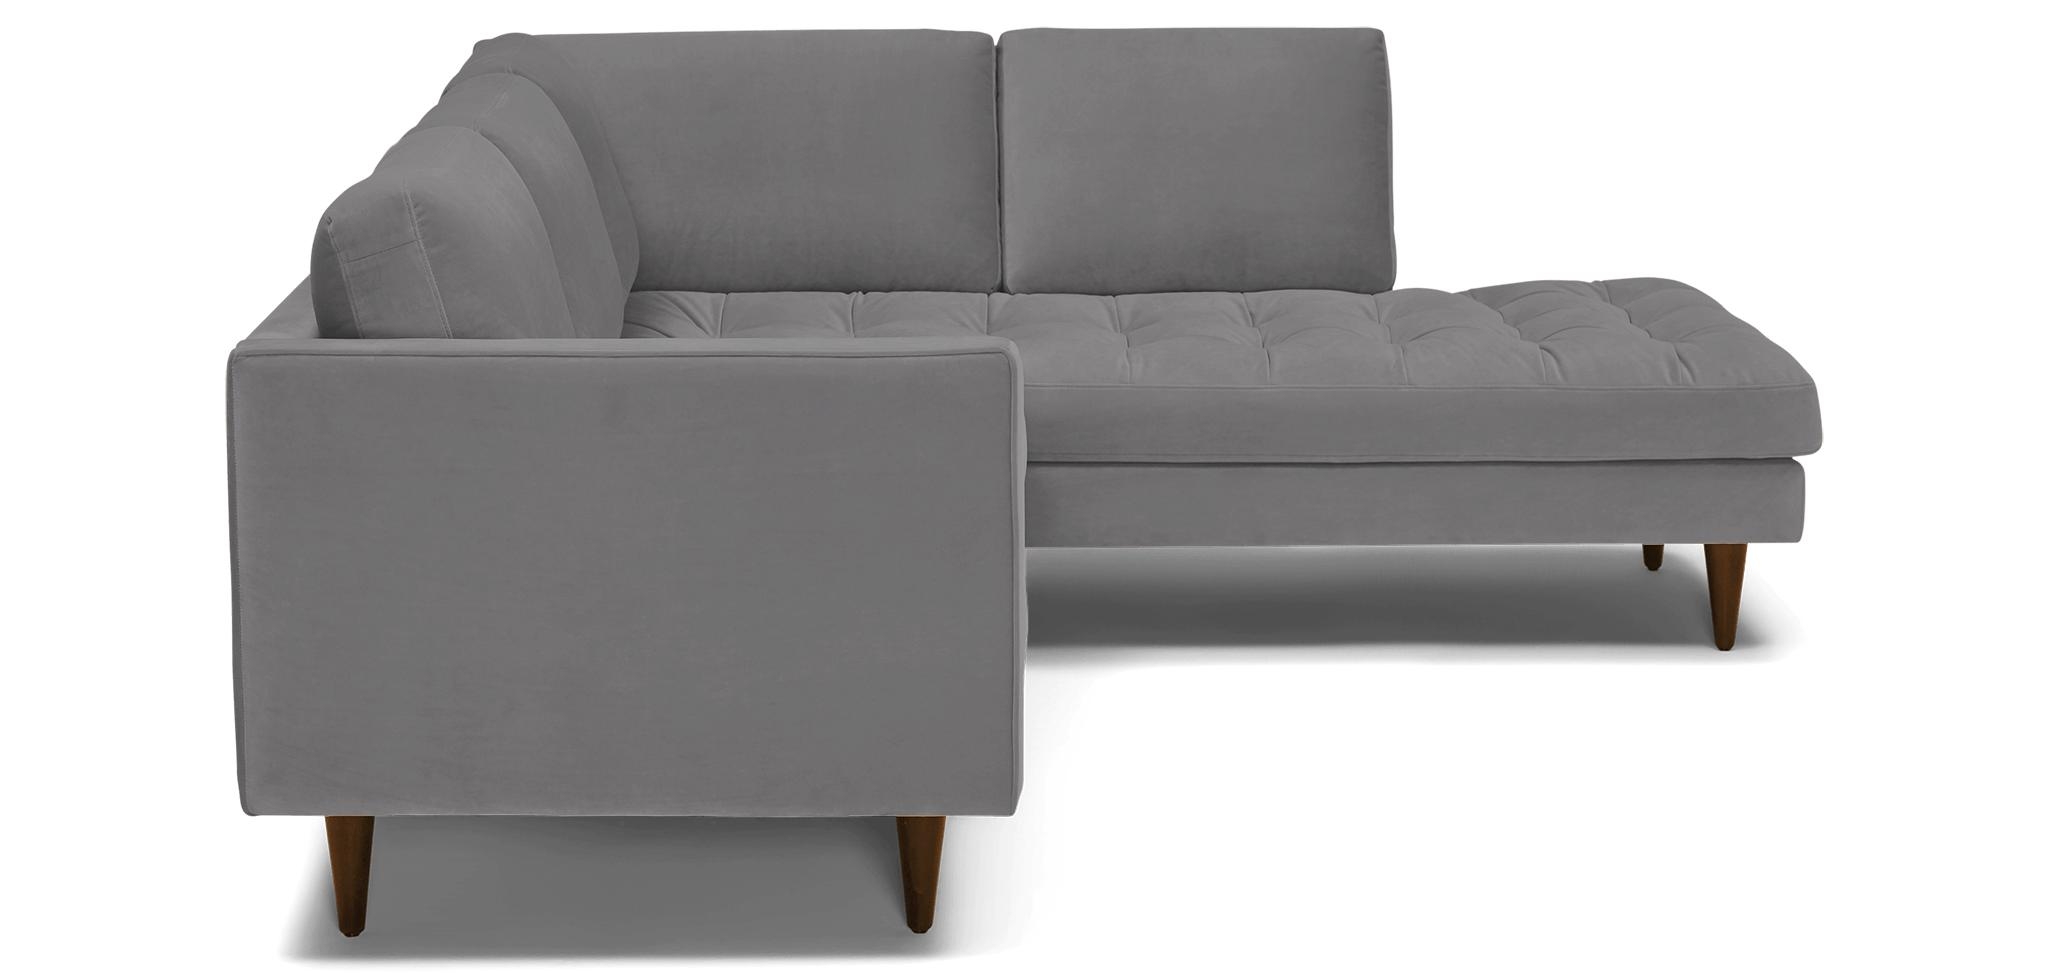 Gray Briar Mid Century Modern Sectional with Bumper - Royale Ash - Mocha - Right  - Image 2